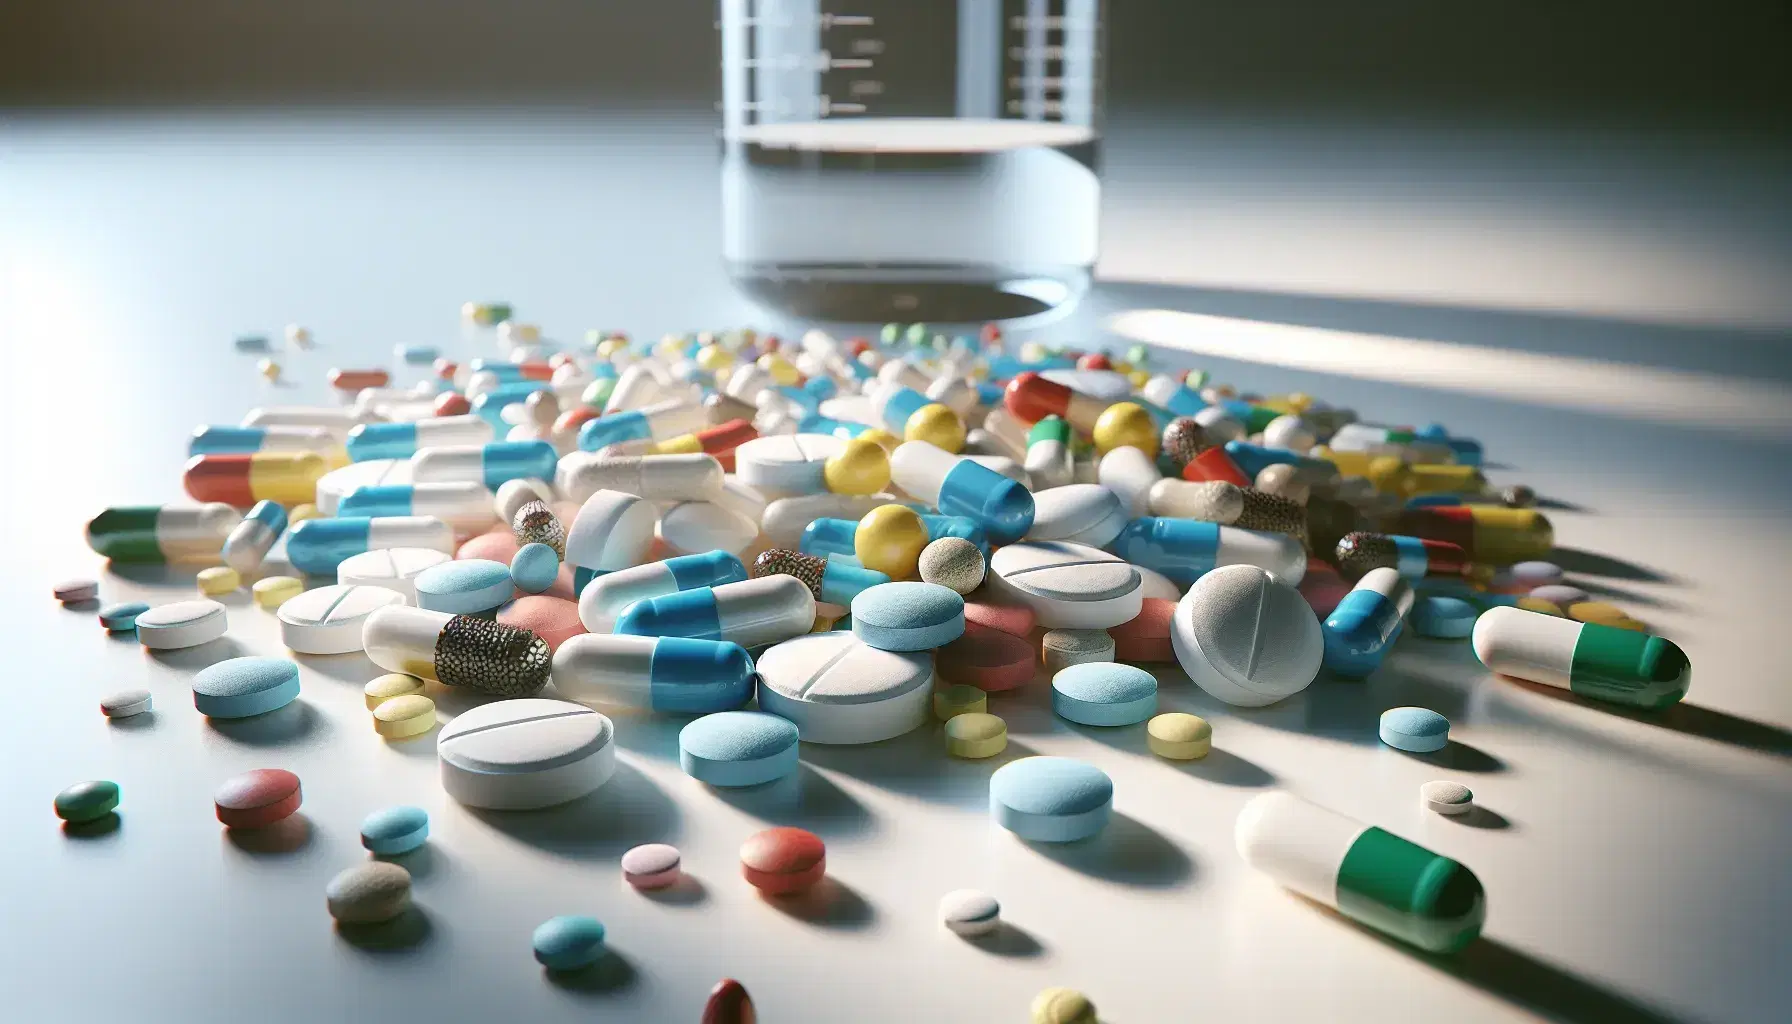 Close-up of multicolored pharmaceutical pills and capsules scattered on white surface with transparent beaker on background in laboratory.